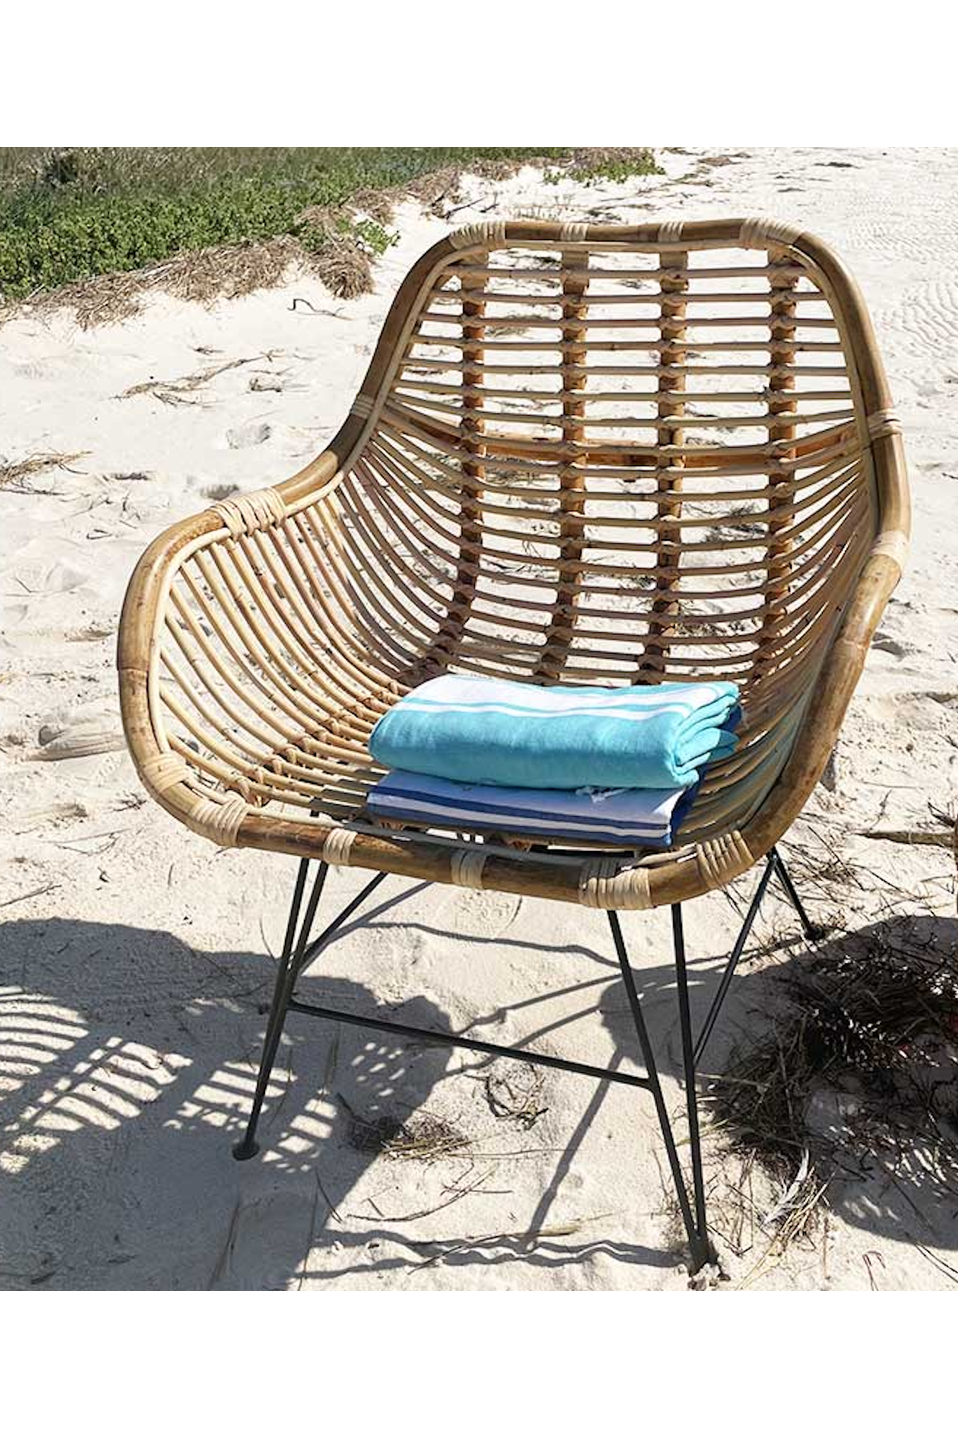 Rattan chair with arm rest